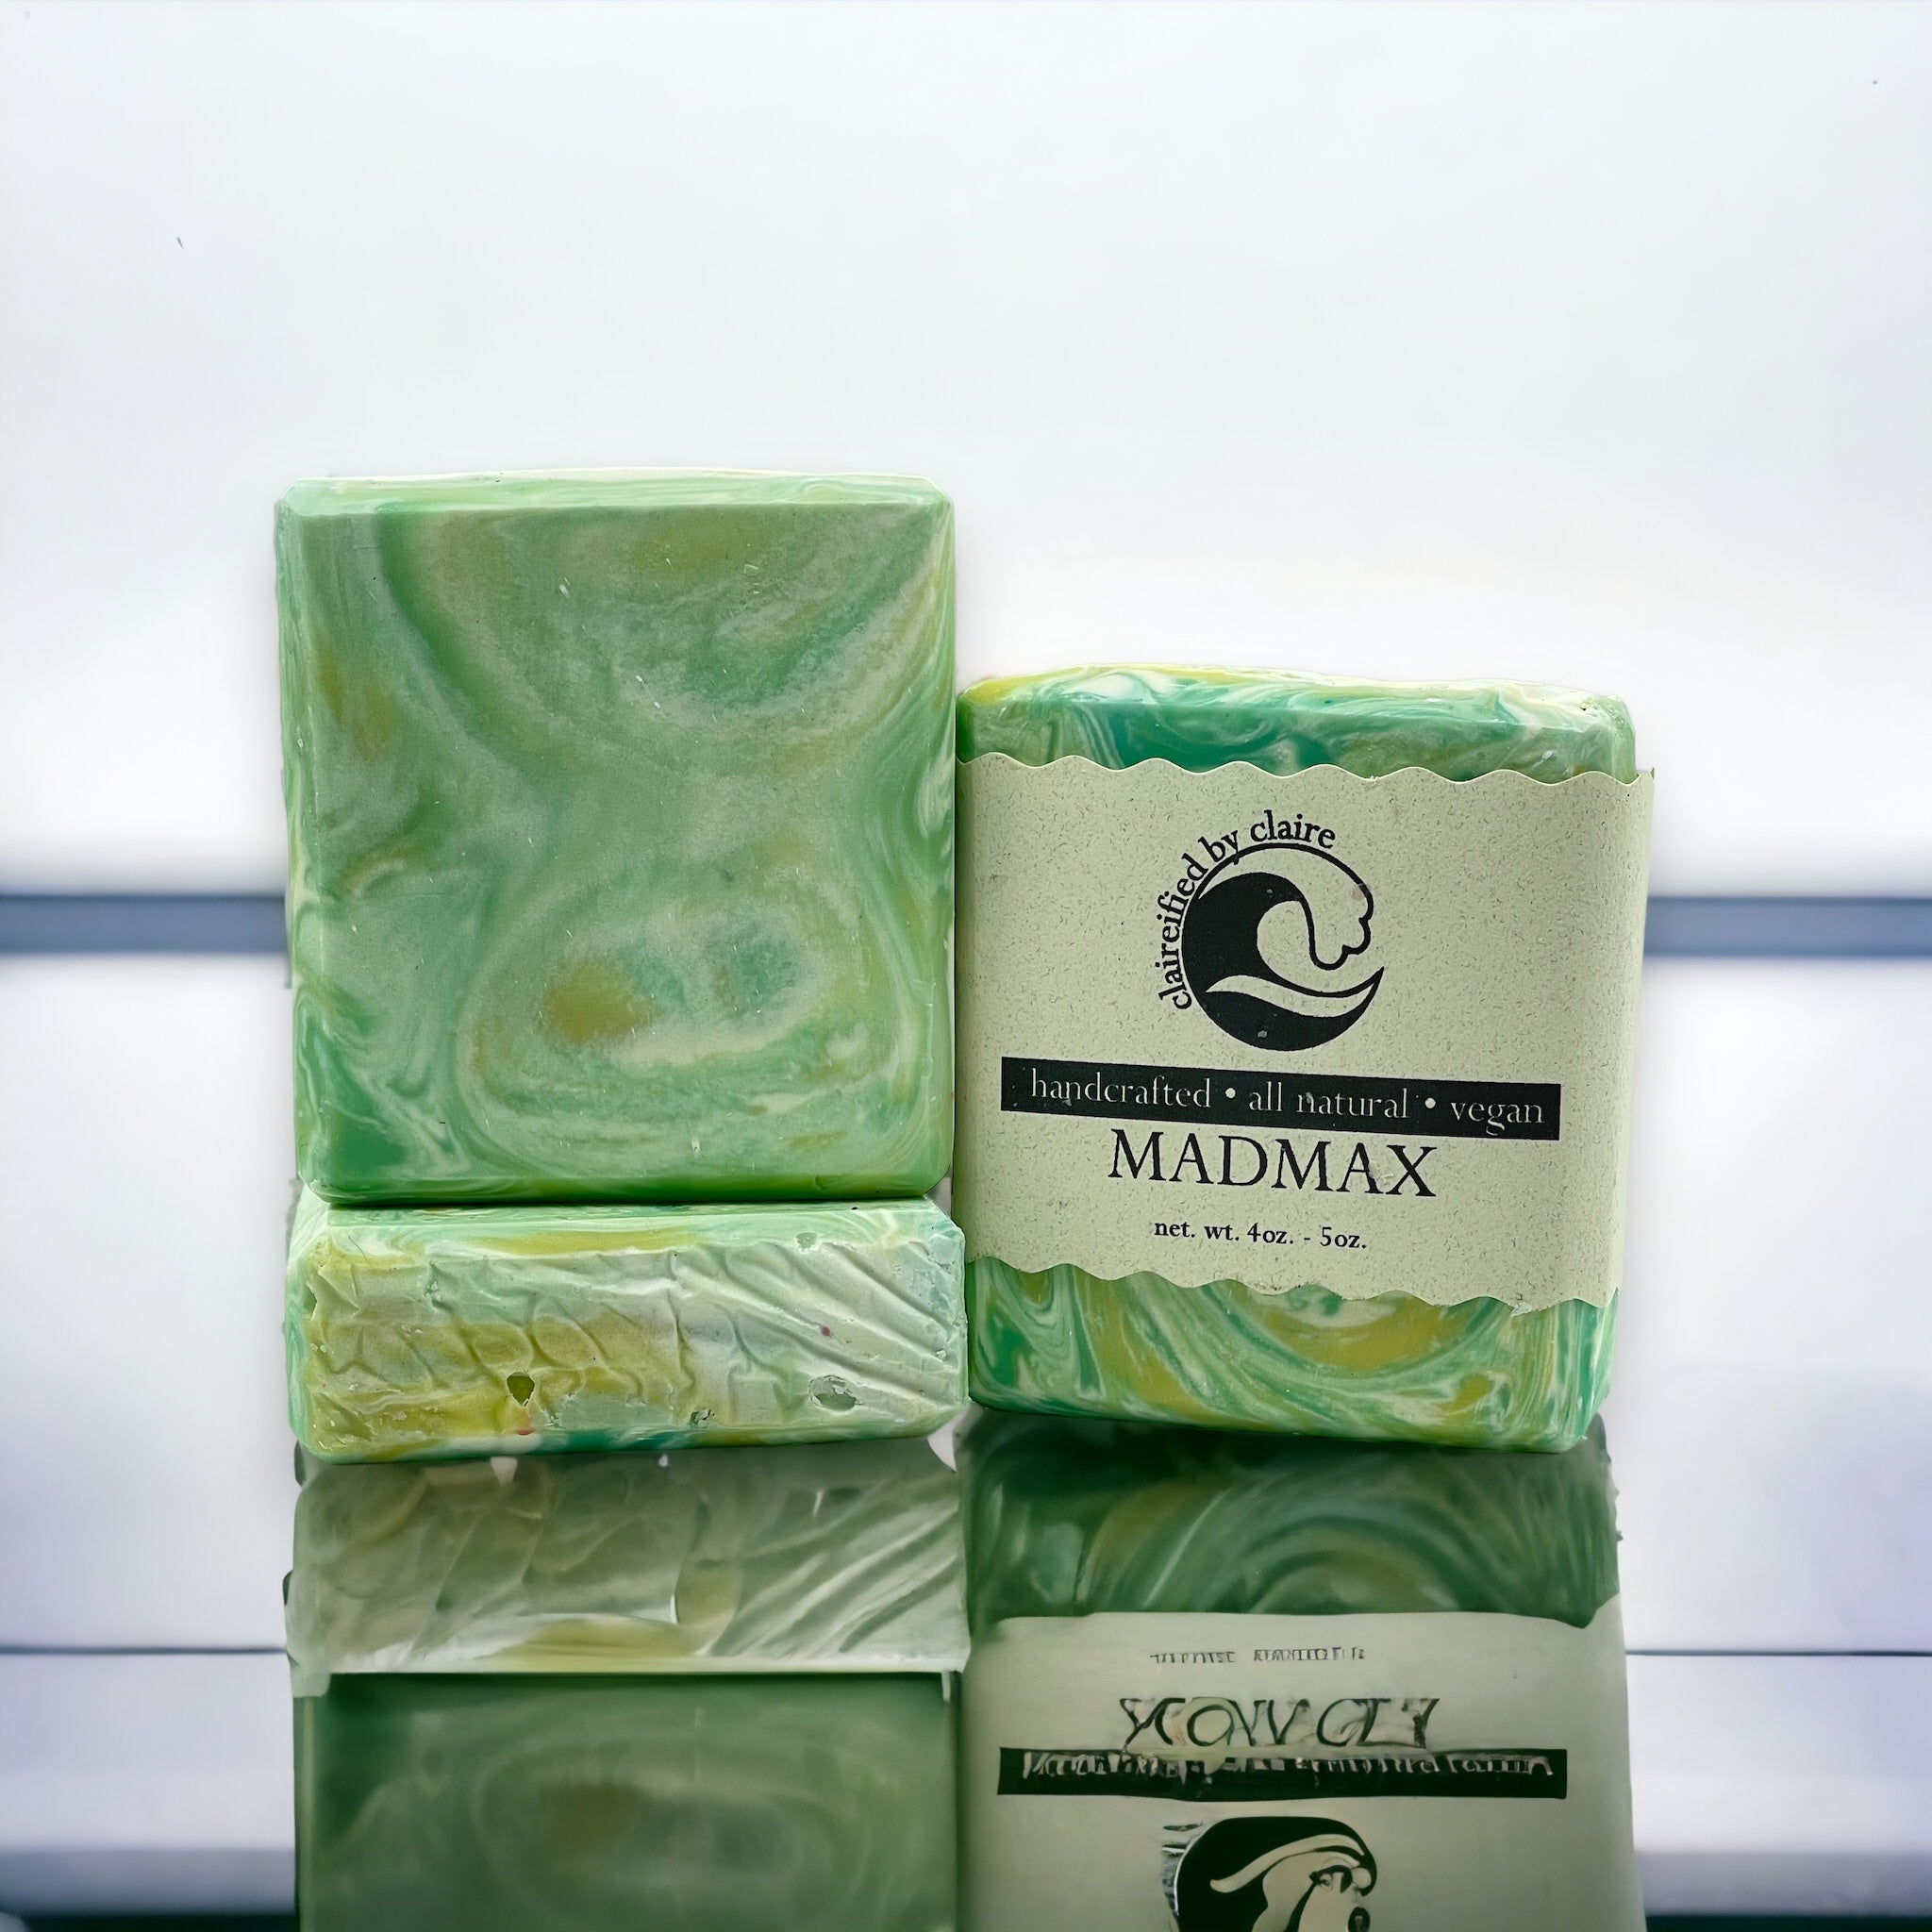 MADMAX handmade soap inspired by Max from Stranger Things